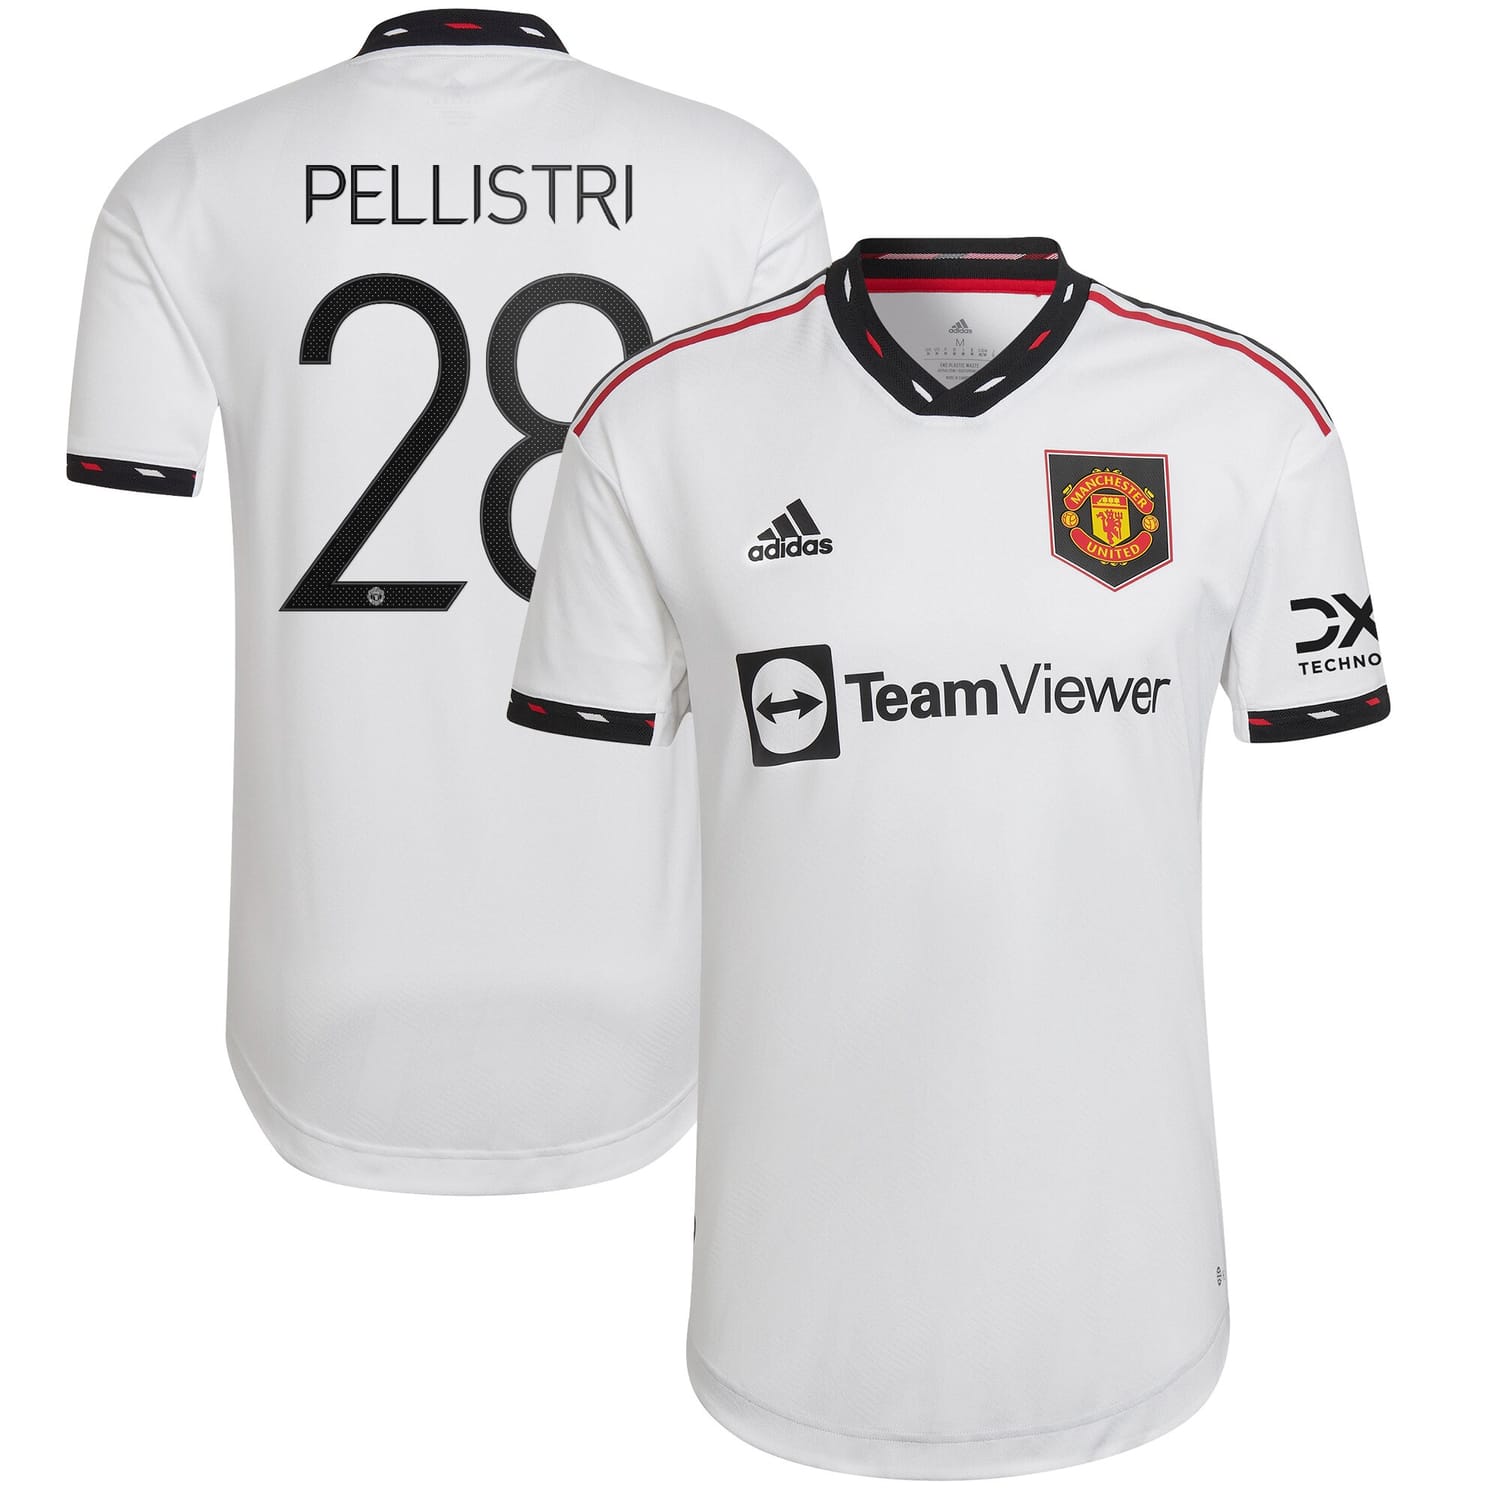 Premier League Manchester United Away Cup Authentic Jersey Shirt 2022-23 player Facundo Pellistri 28 printing for Men